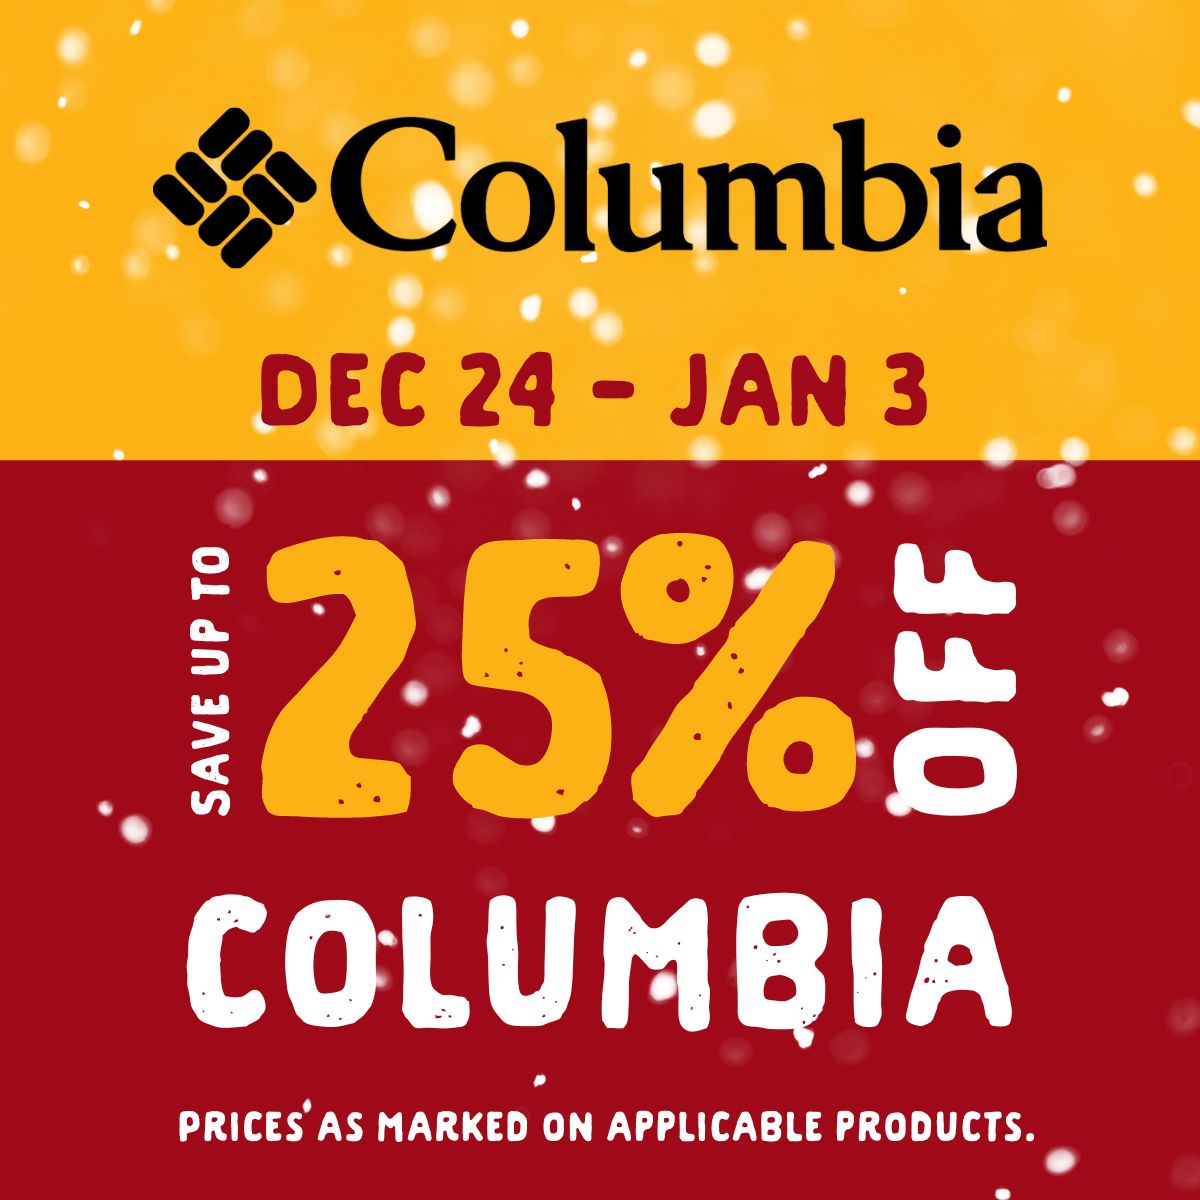 25% off Columbia from December 24 until January 3! Prices as marked on applicable products.